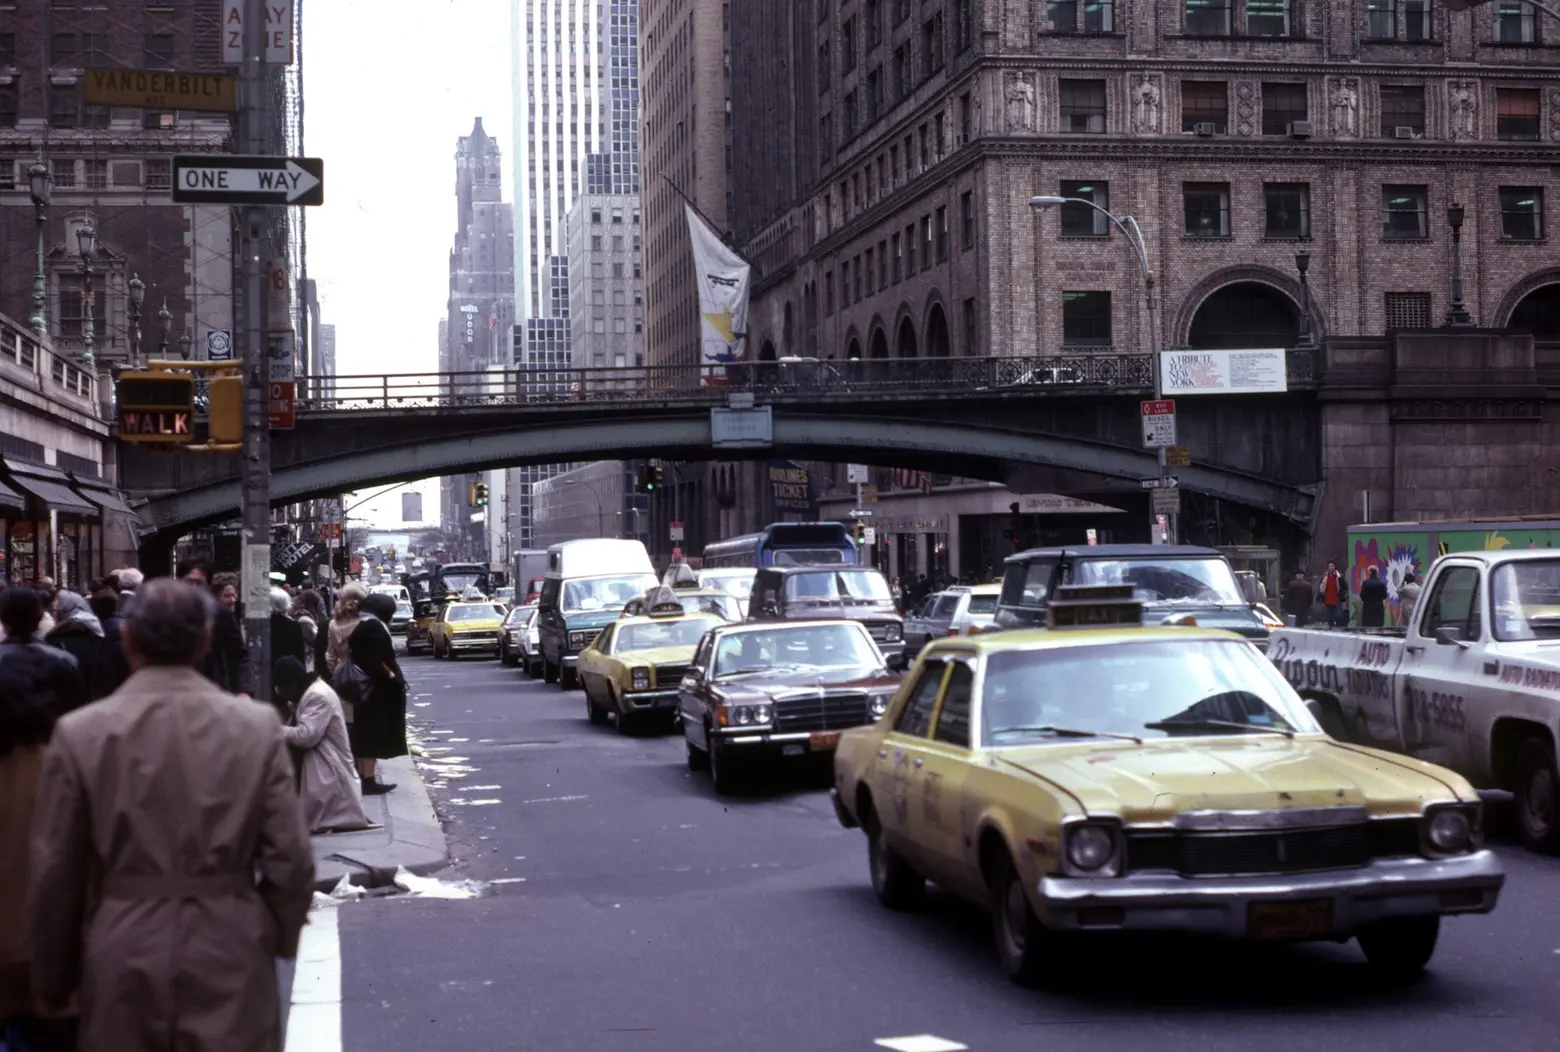 NYC 1979, vintage New York, old NYC photos, NYC 1970s